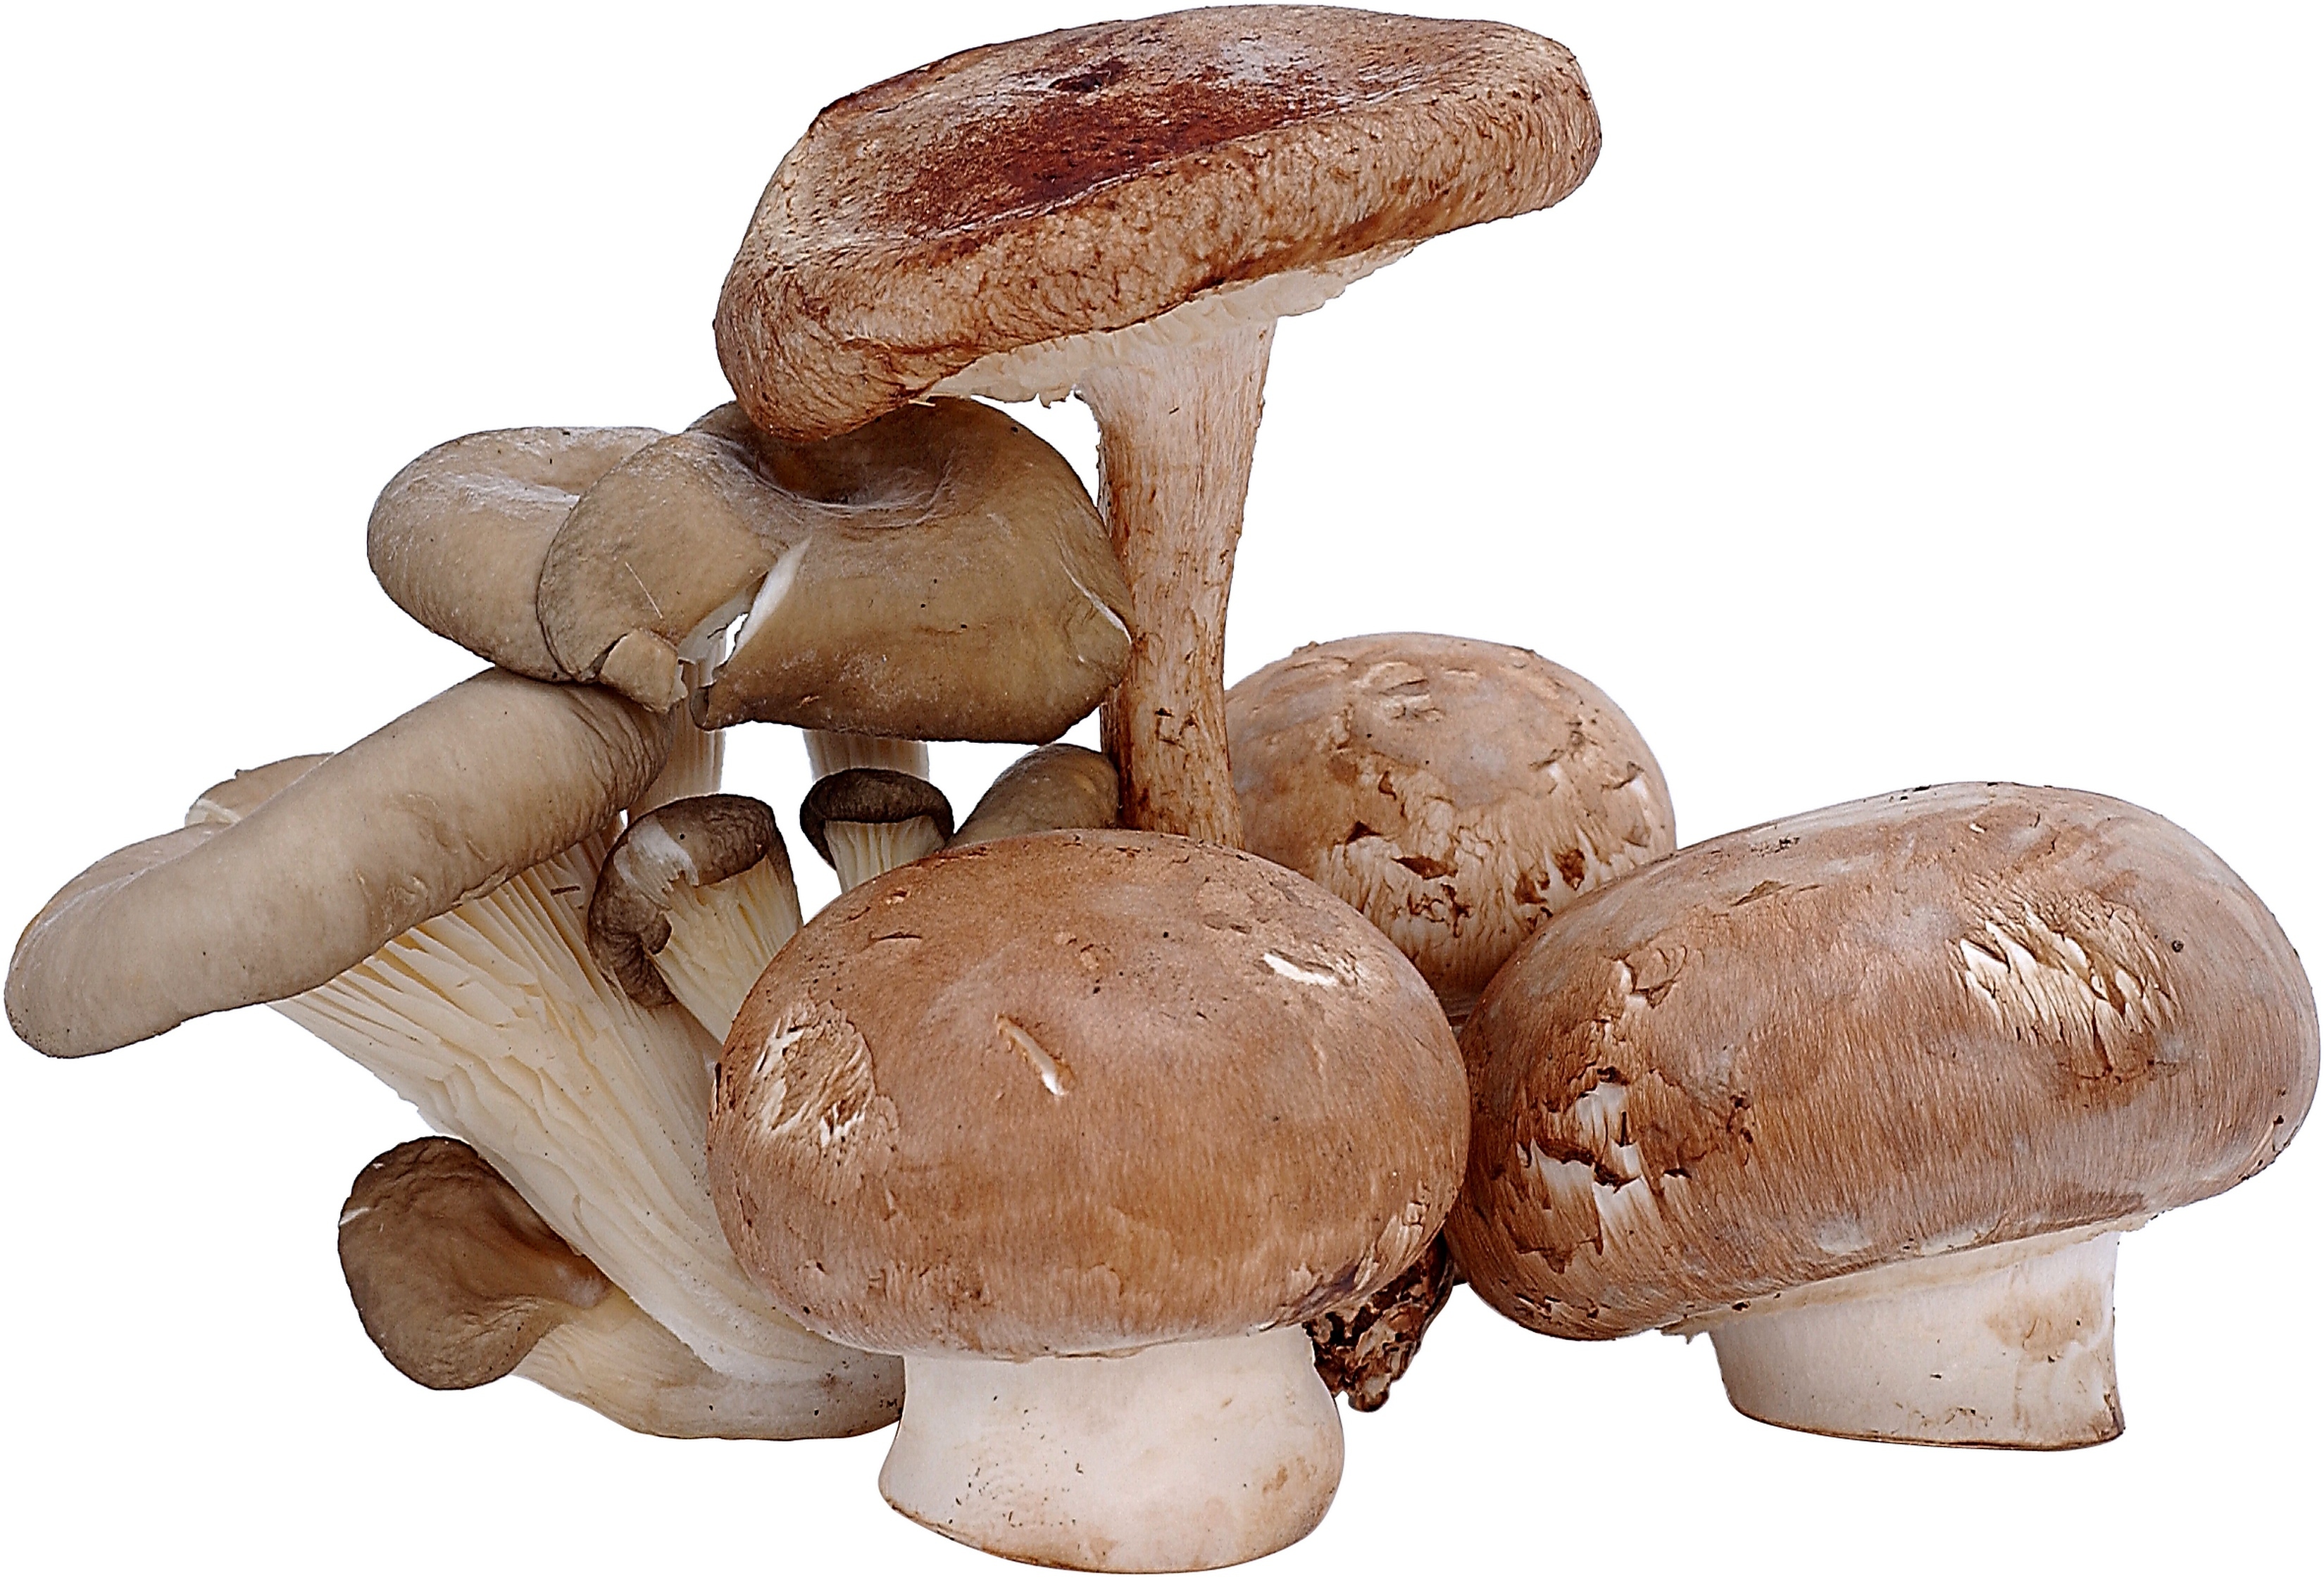 There's Nothing Mushy About Mushrooms | Healthy Eating | SF Gate